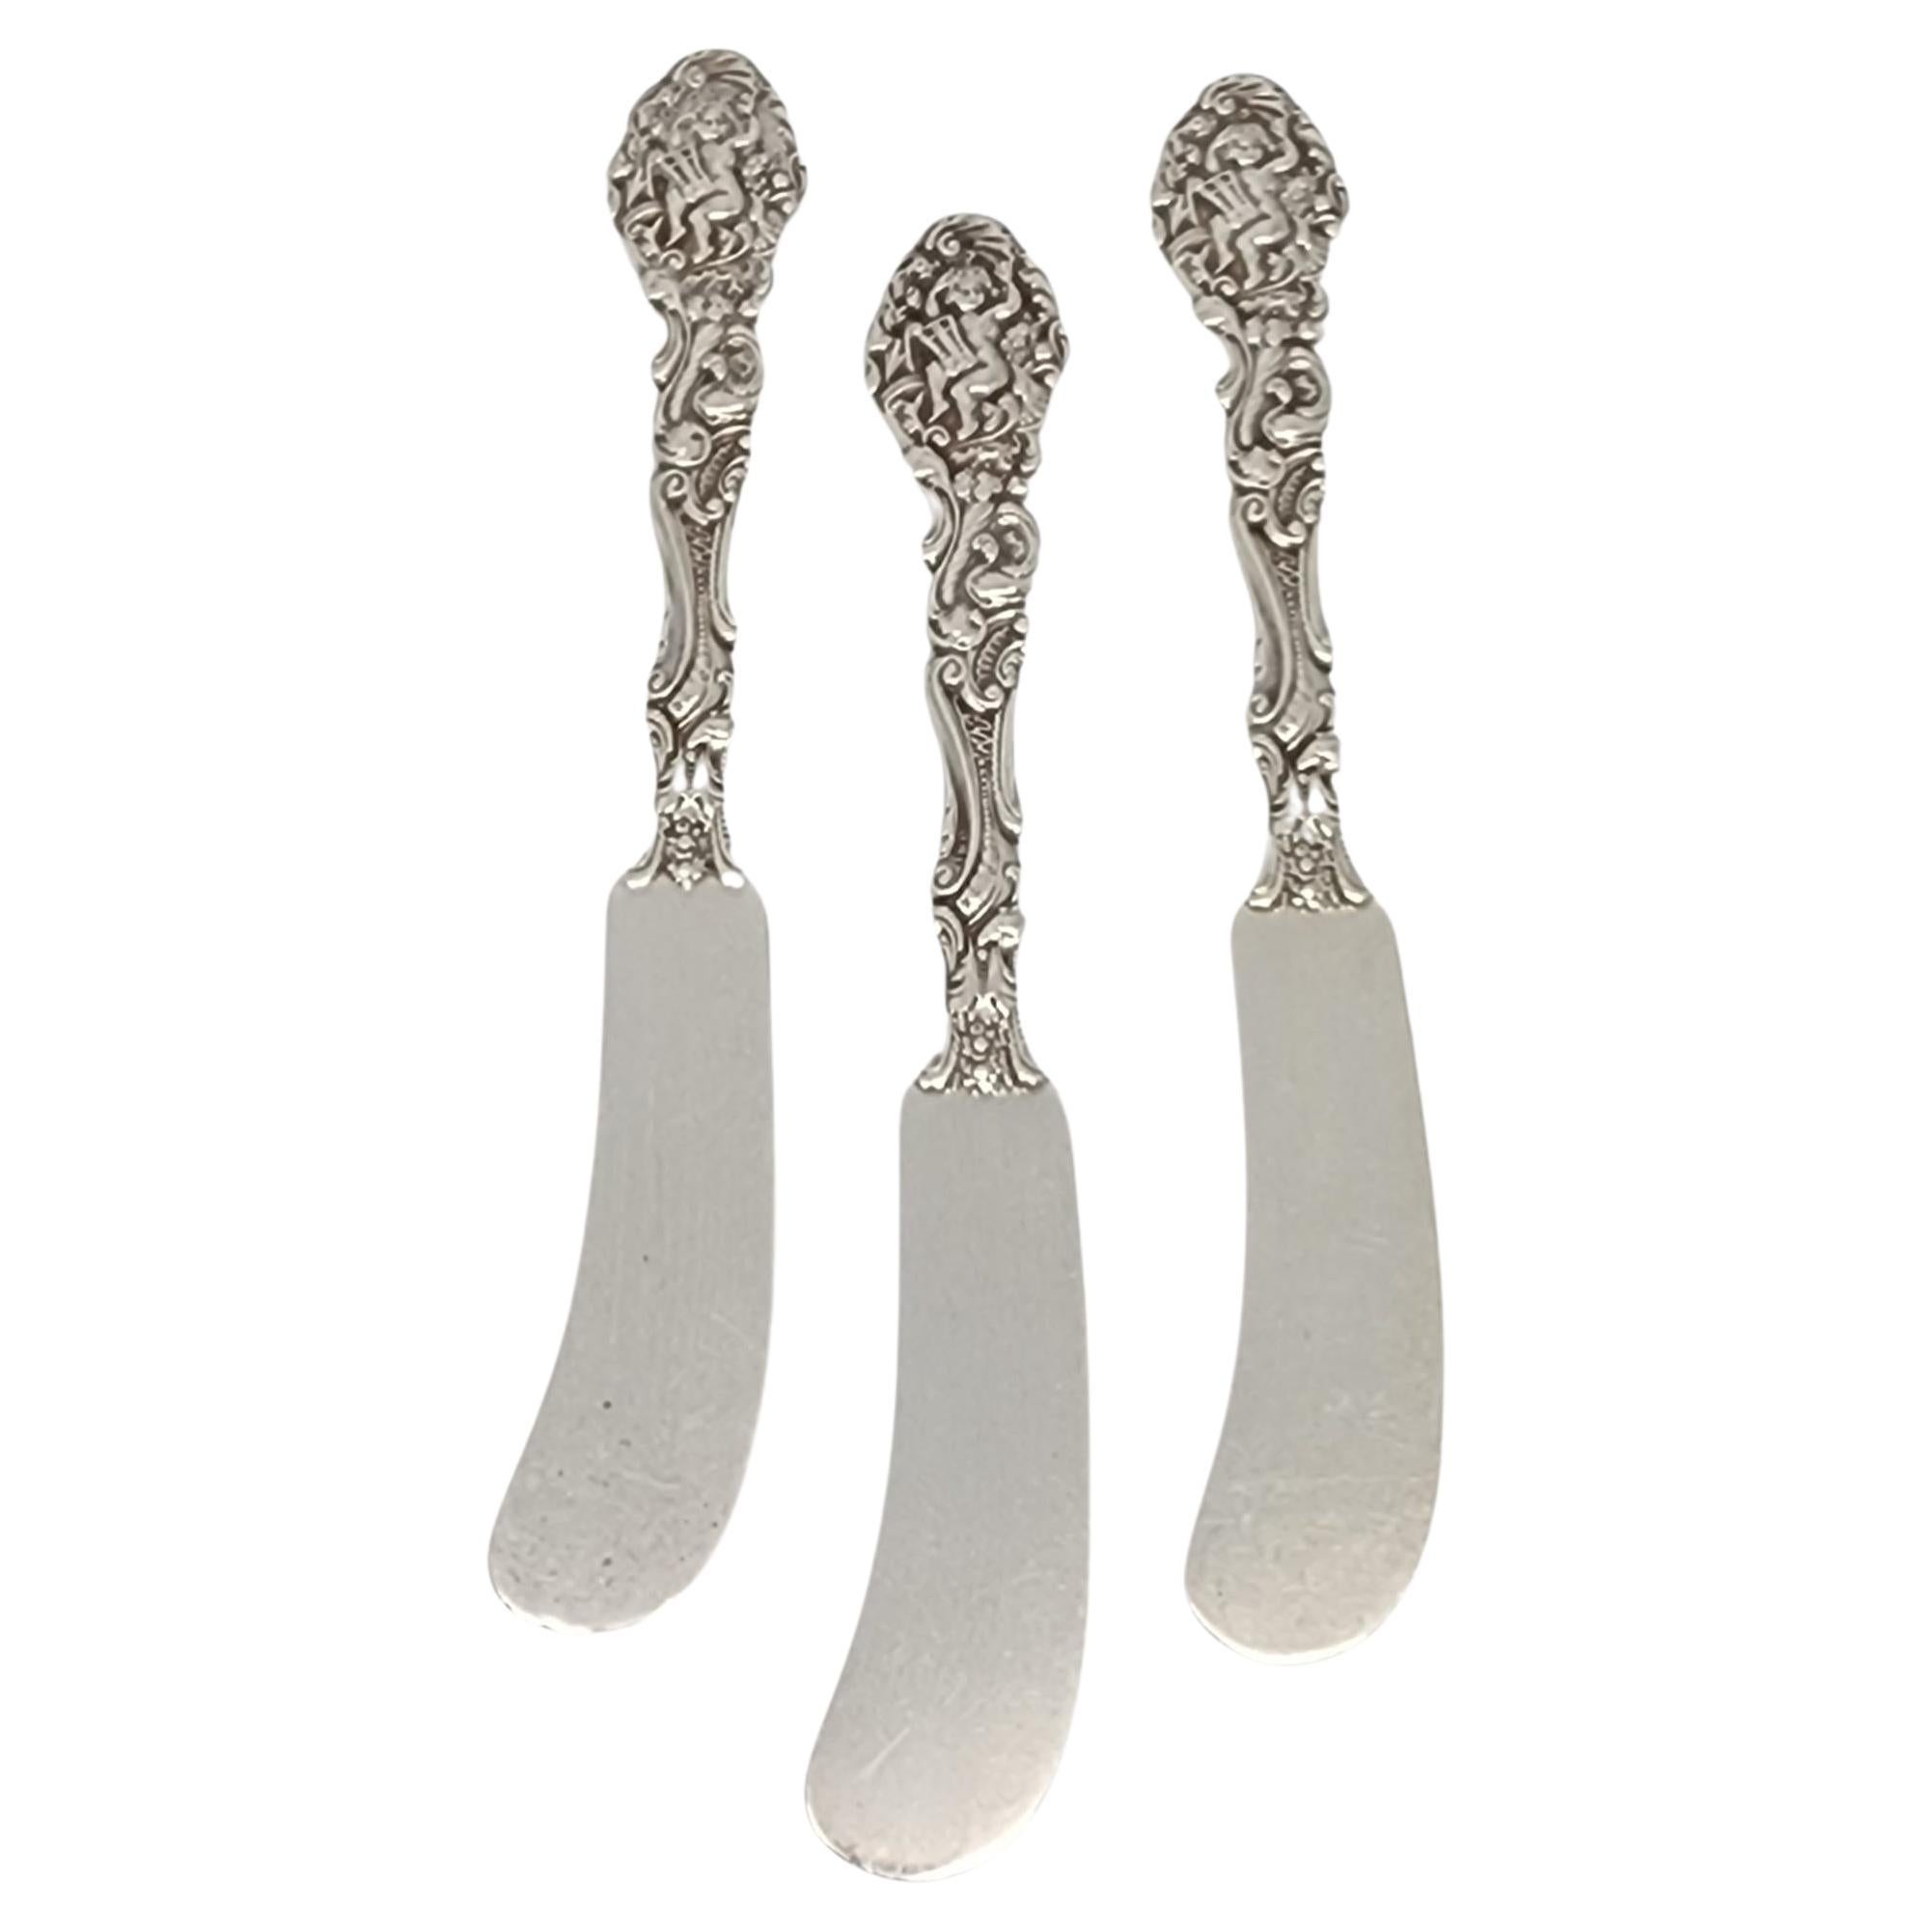 3 Gorham Versailles Sterling Silver Flat Handle Butter Spreaders w/Mono #17135 For Sale